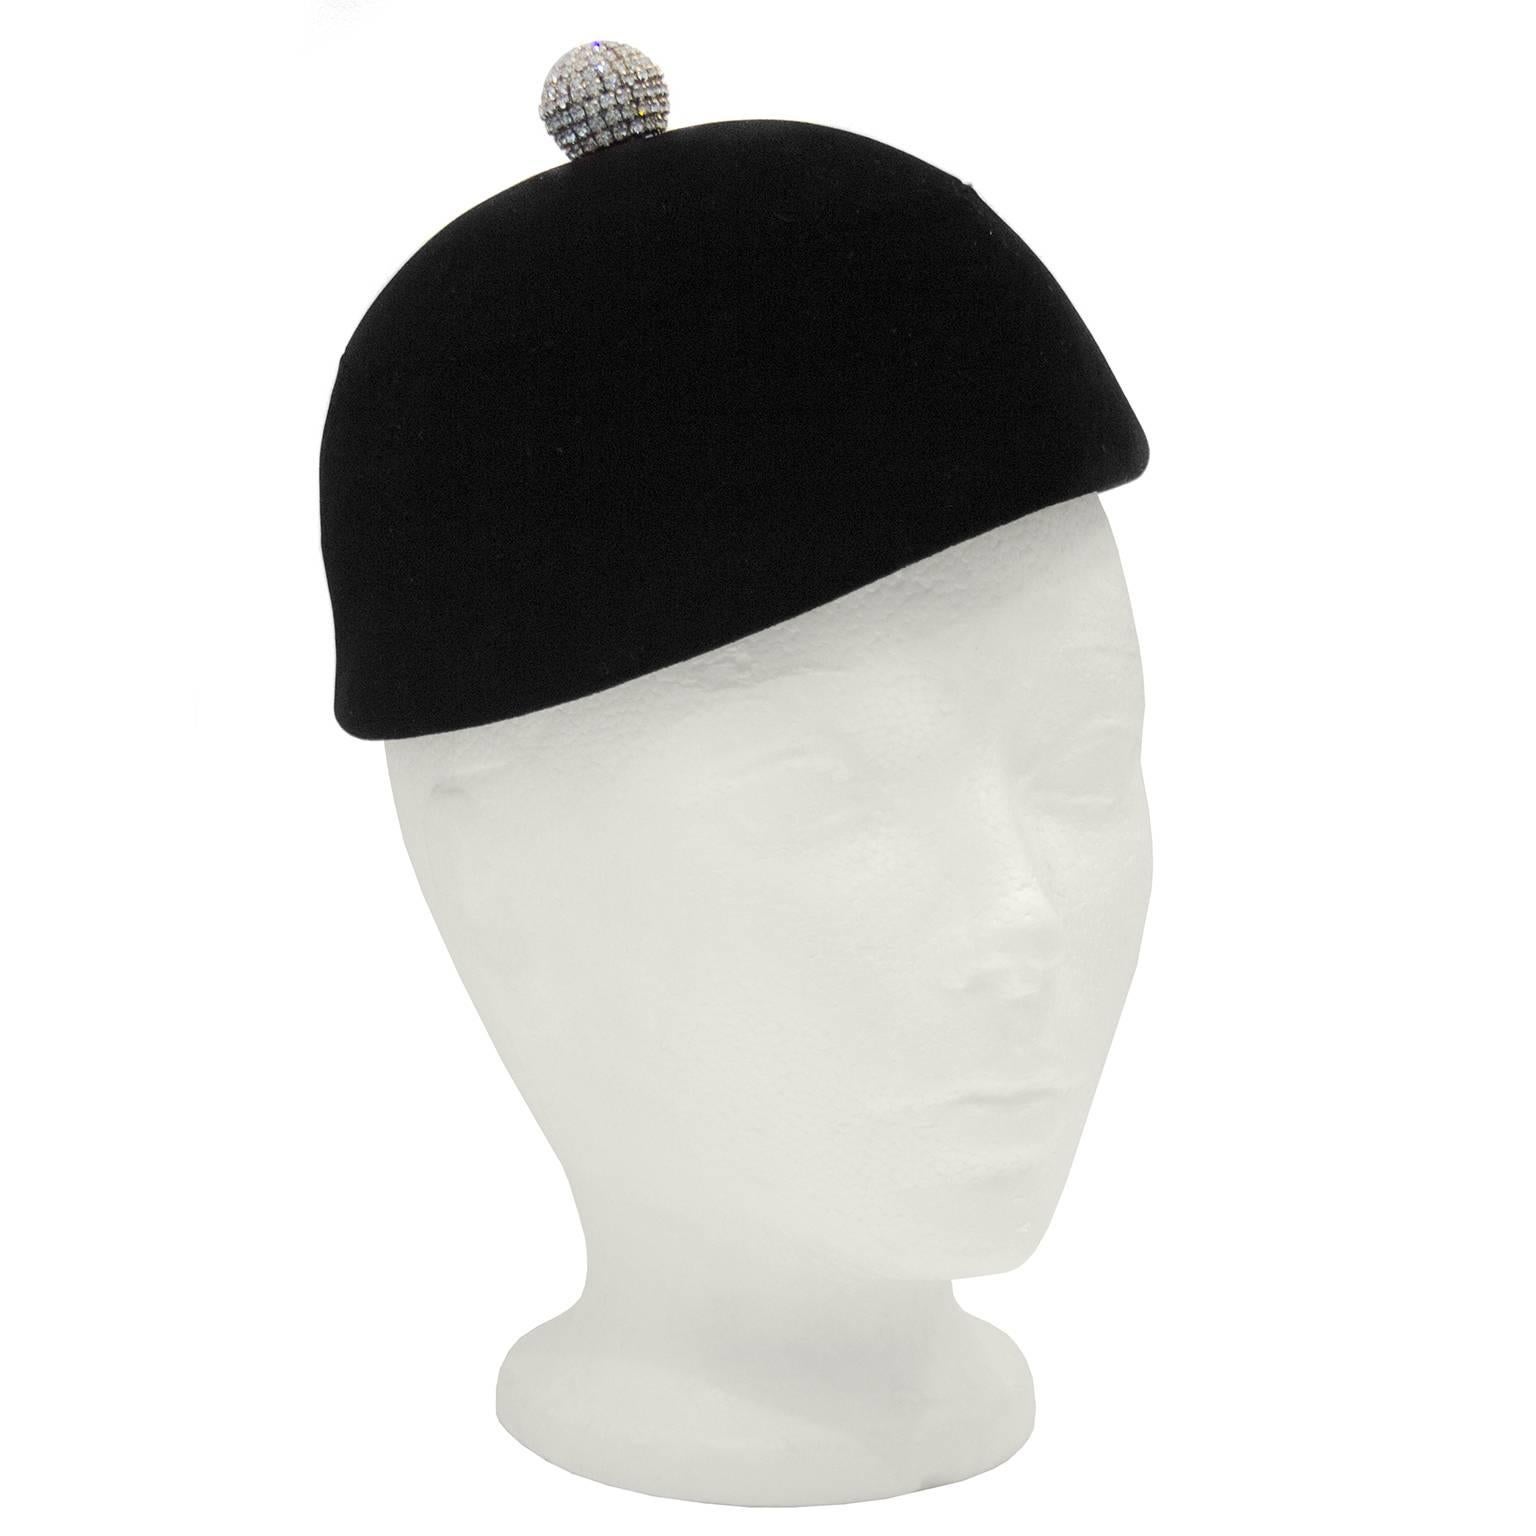 Absolutely stunning 1950's Givenchy jet black minimalist style velvet jockey hat with a small rhinestone incrusted pom pom at the top. This piece shows the stunning simplicity of the early Givenchy work with the attention to detail and beautiful